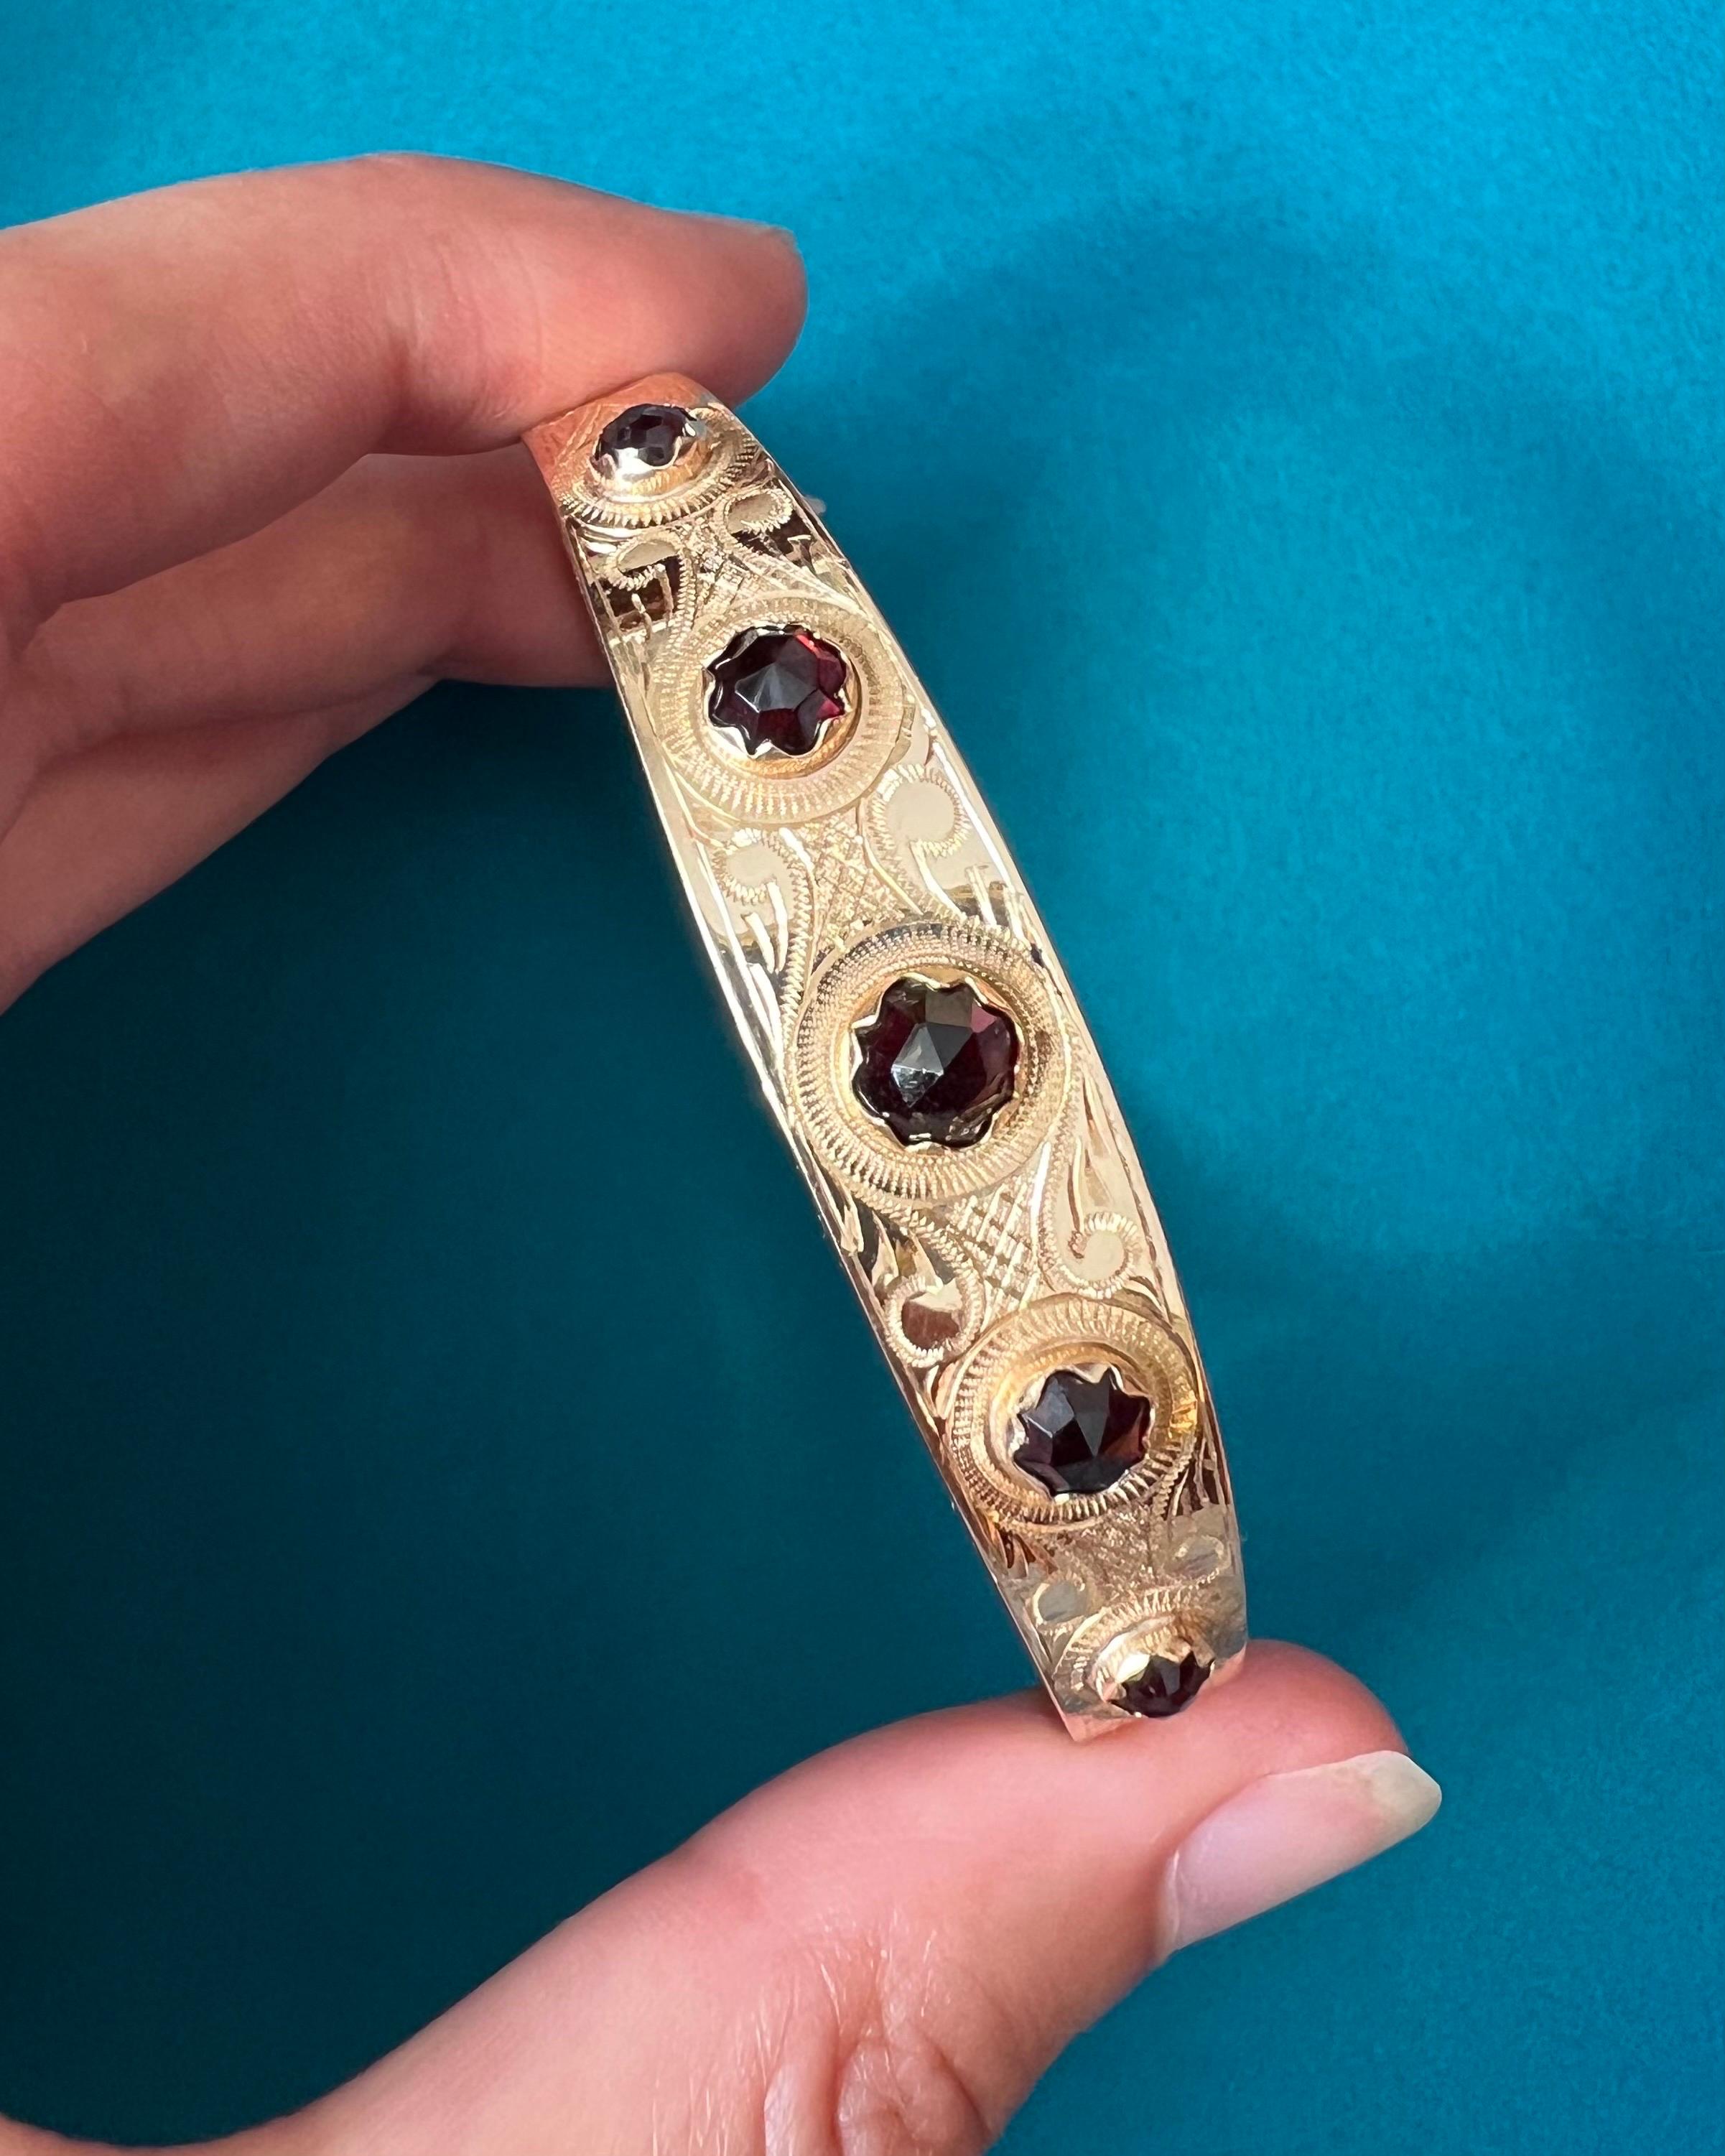 A vintage garnet bangle bracelet set in a 14 karat yellow frame. The gold of the bangle is beautifully made with an engraved and structured design. The bracelet features five faceted garnet stones set in a gold scalloped bezel setting. The garnets